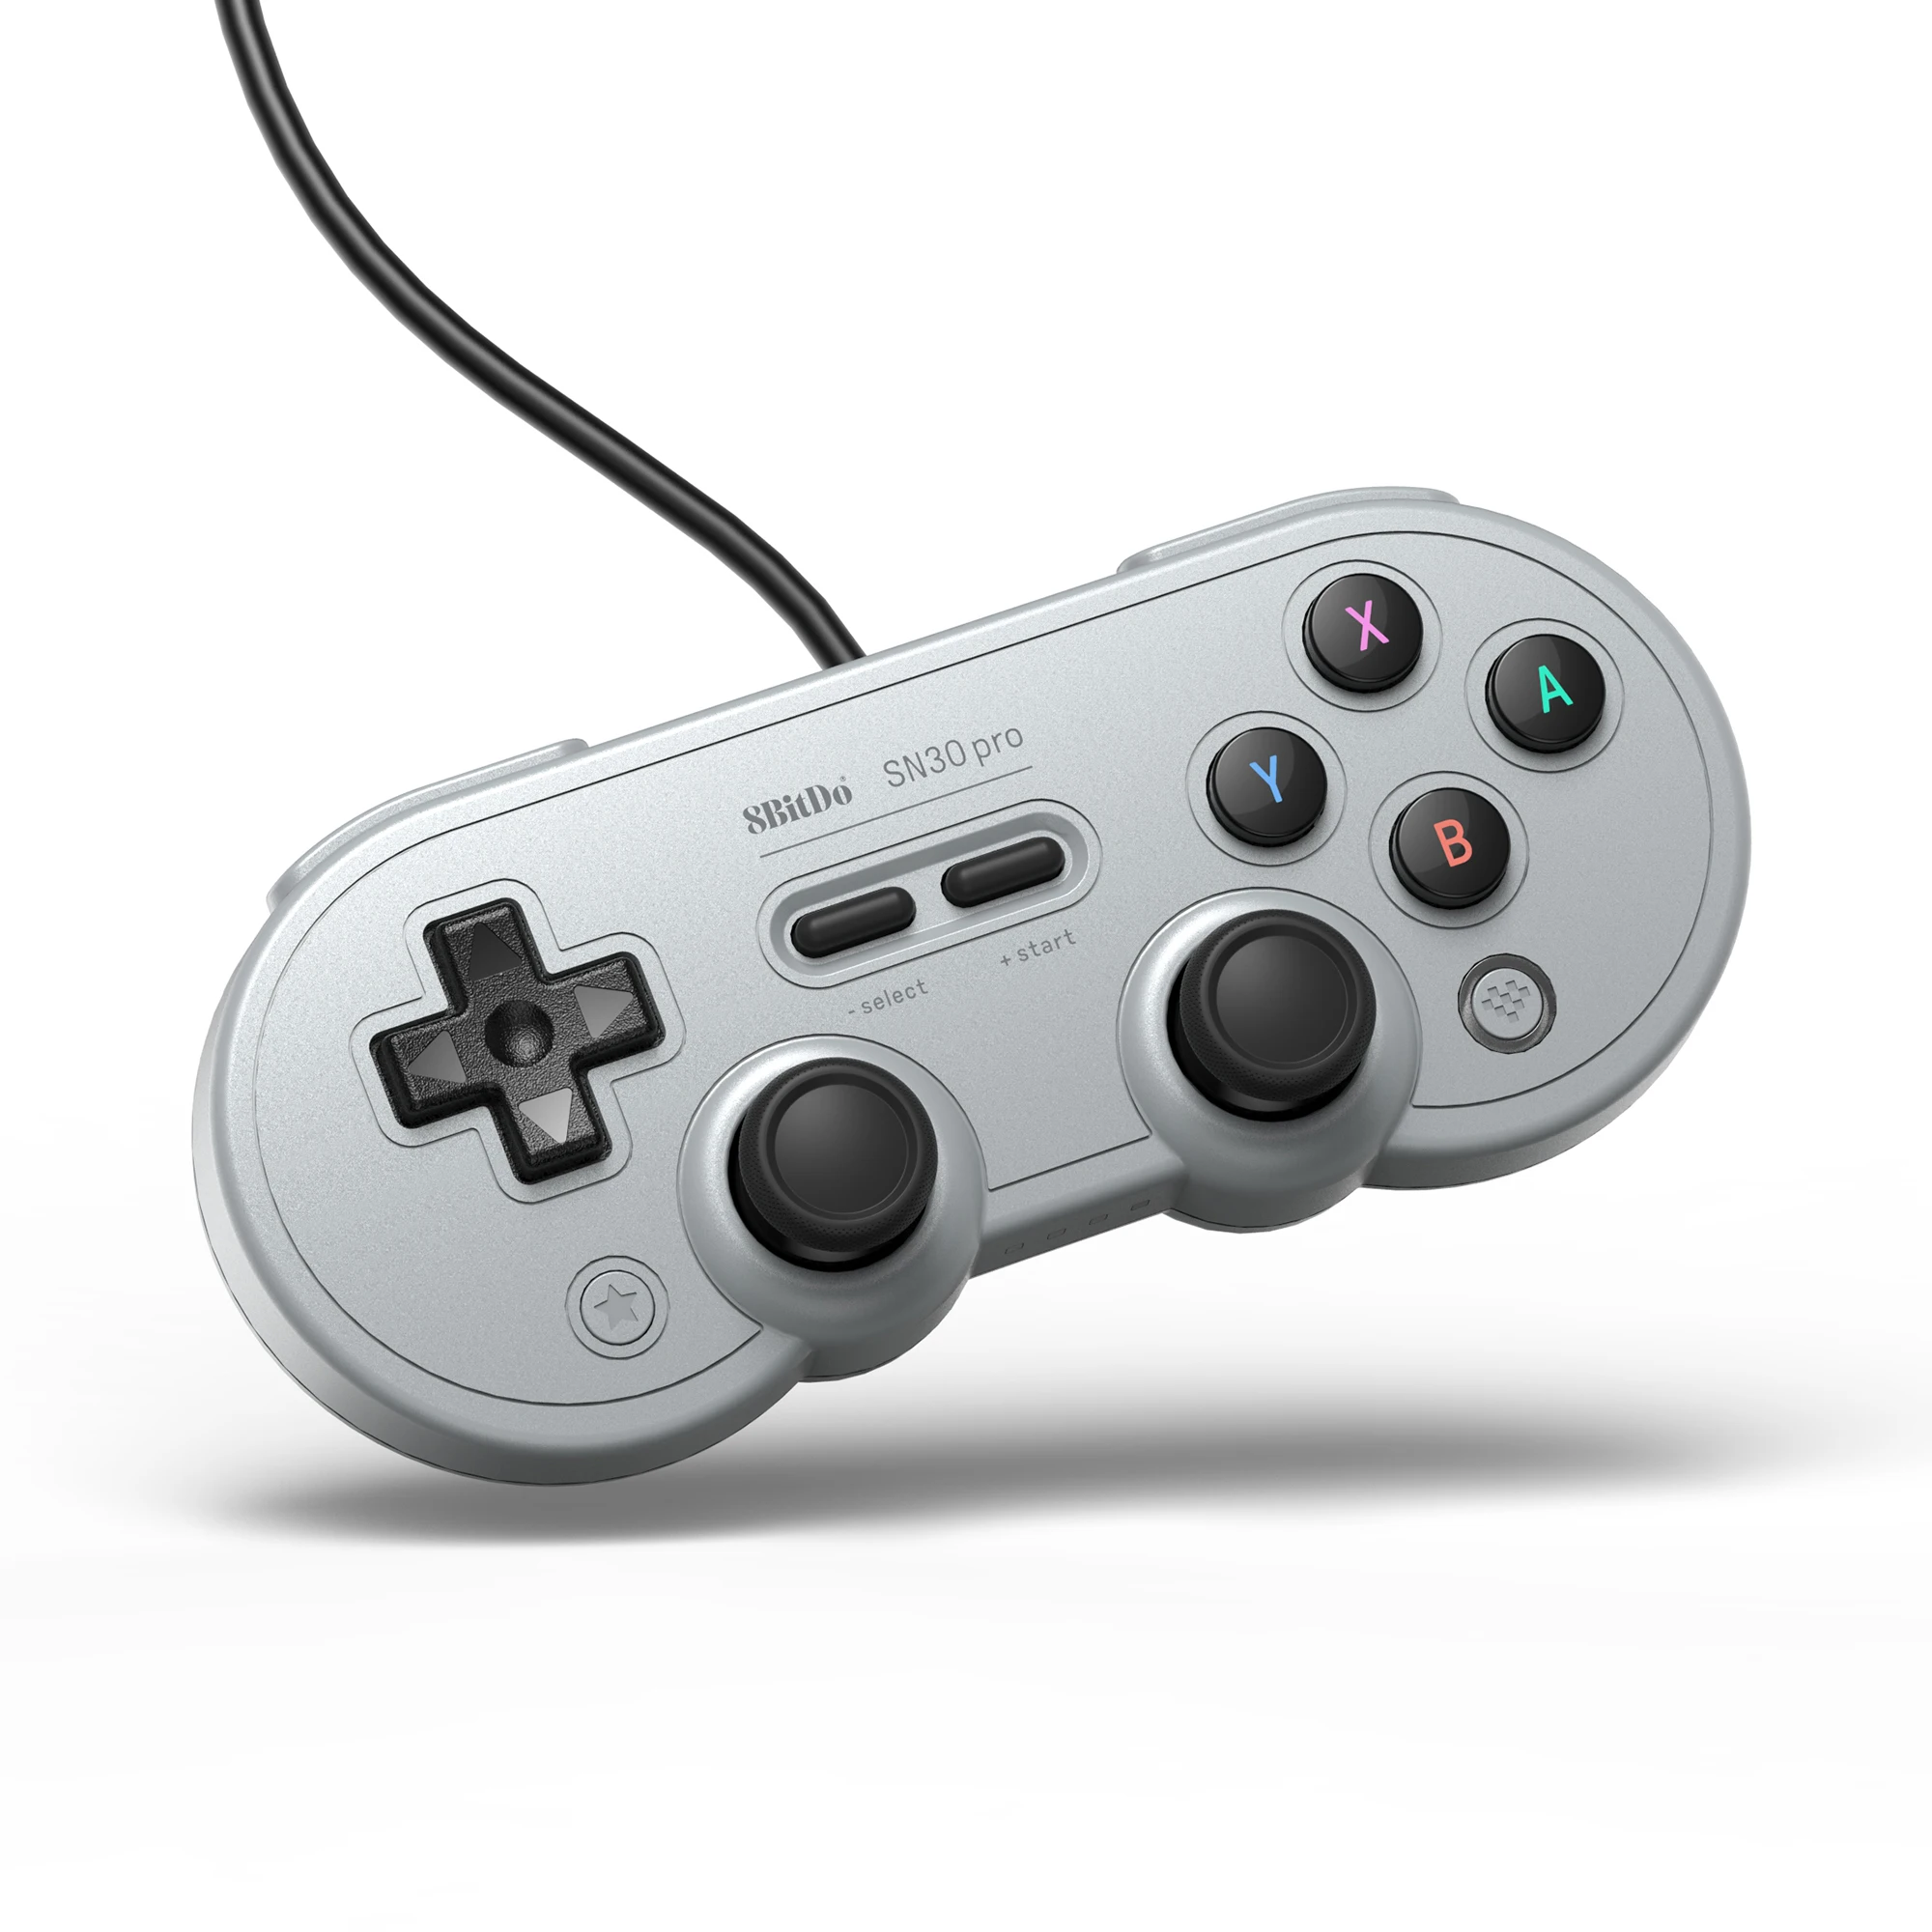 

8BitDo Wired SN30 Pro USB Gamepad Game Controller With 1.8 Meter Cable For for Nintendo Switch Windows Raspberry Pi, Grey